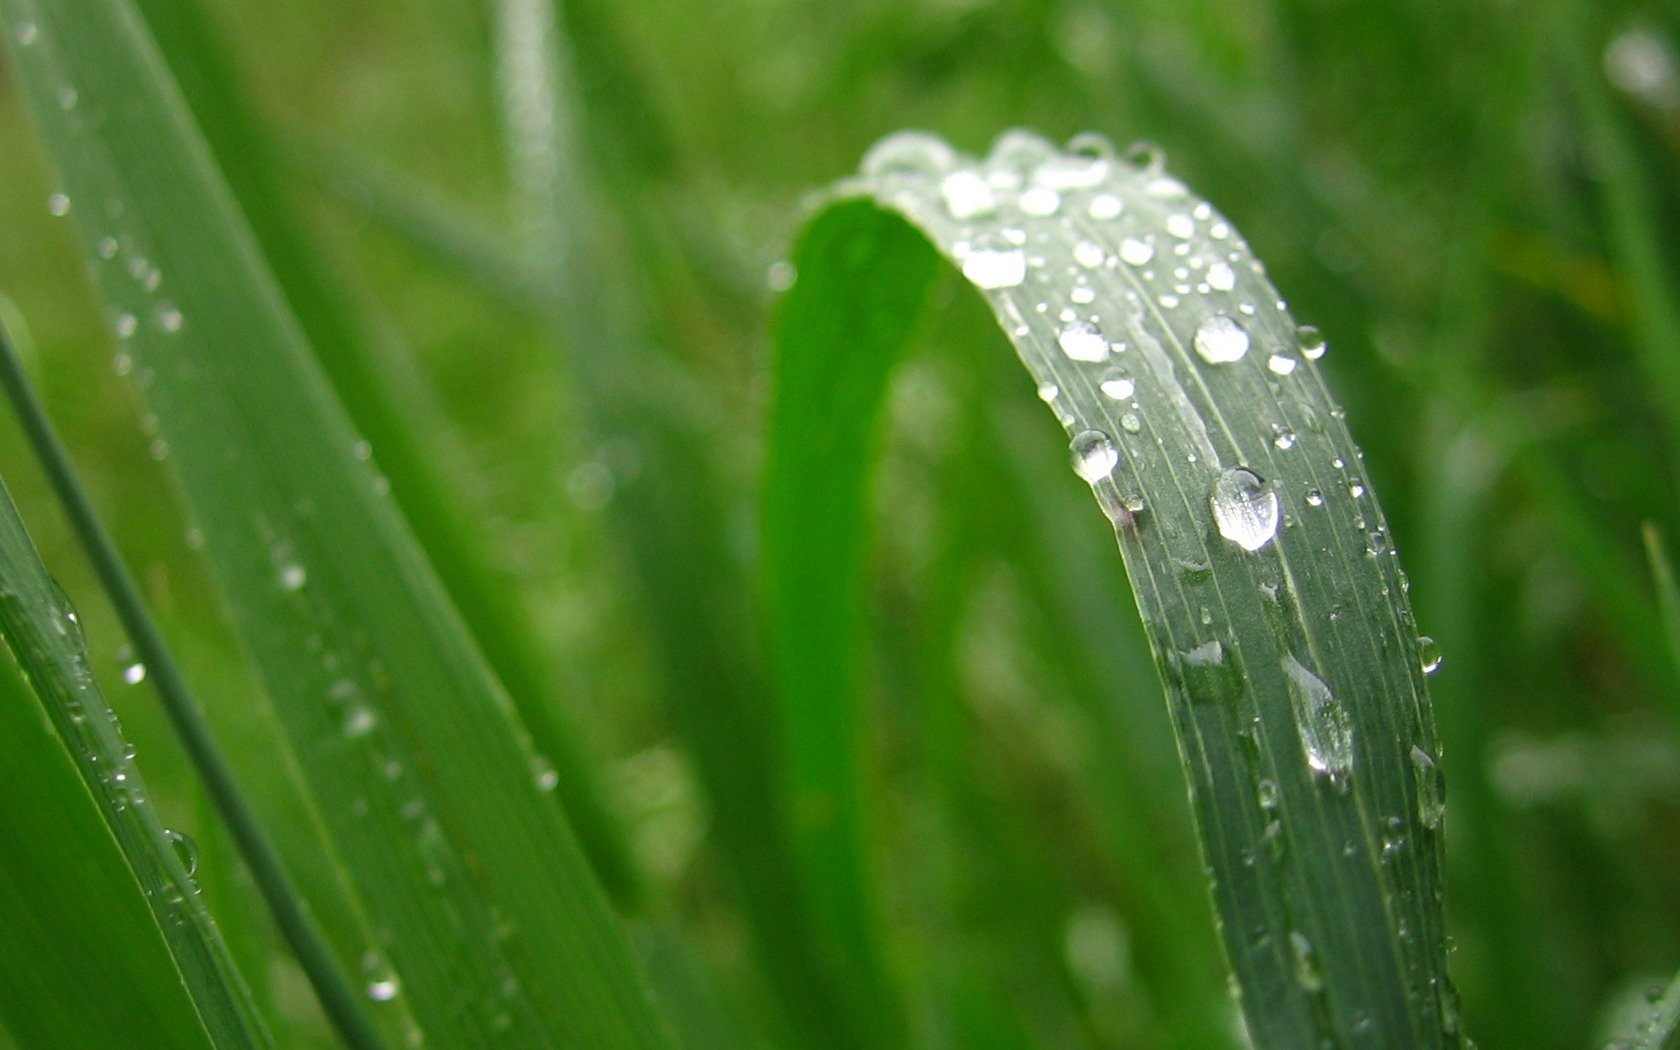 General 1680x1050 grass water drops leaves plants